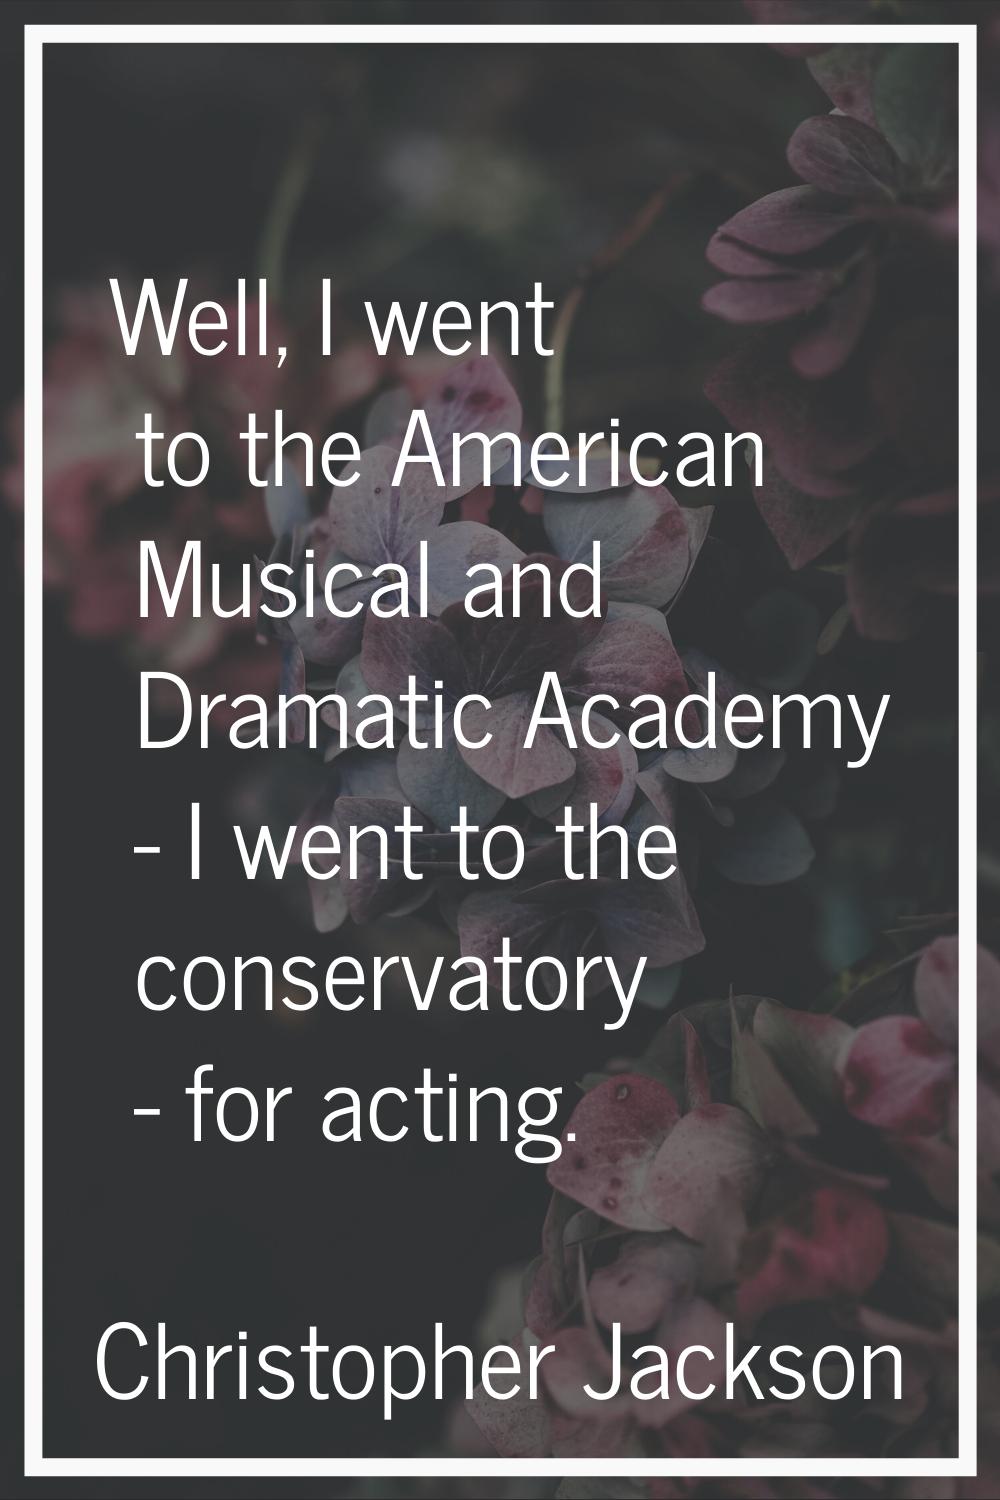 Well, I went to the American Musical and Dramatic Academy - I went to the conservatory - for acting